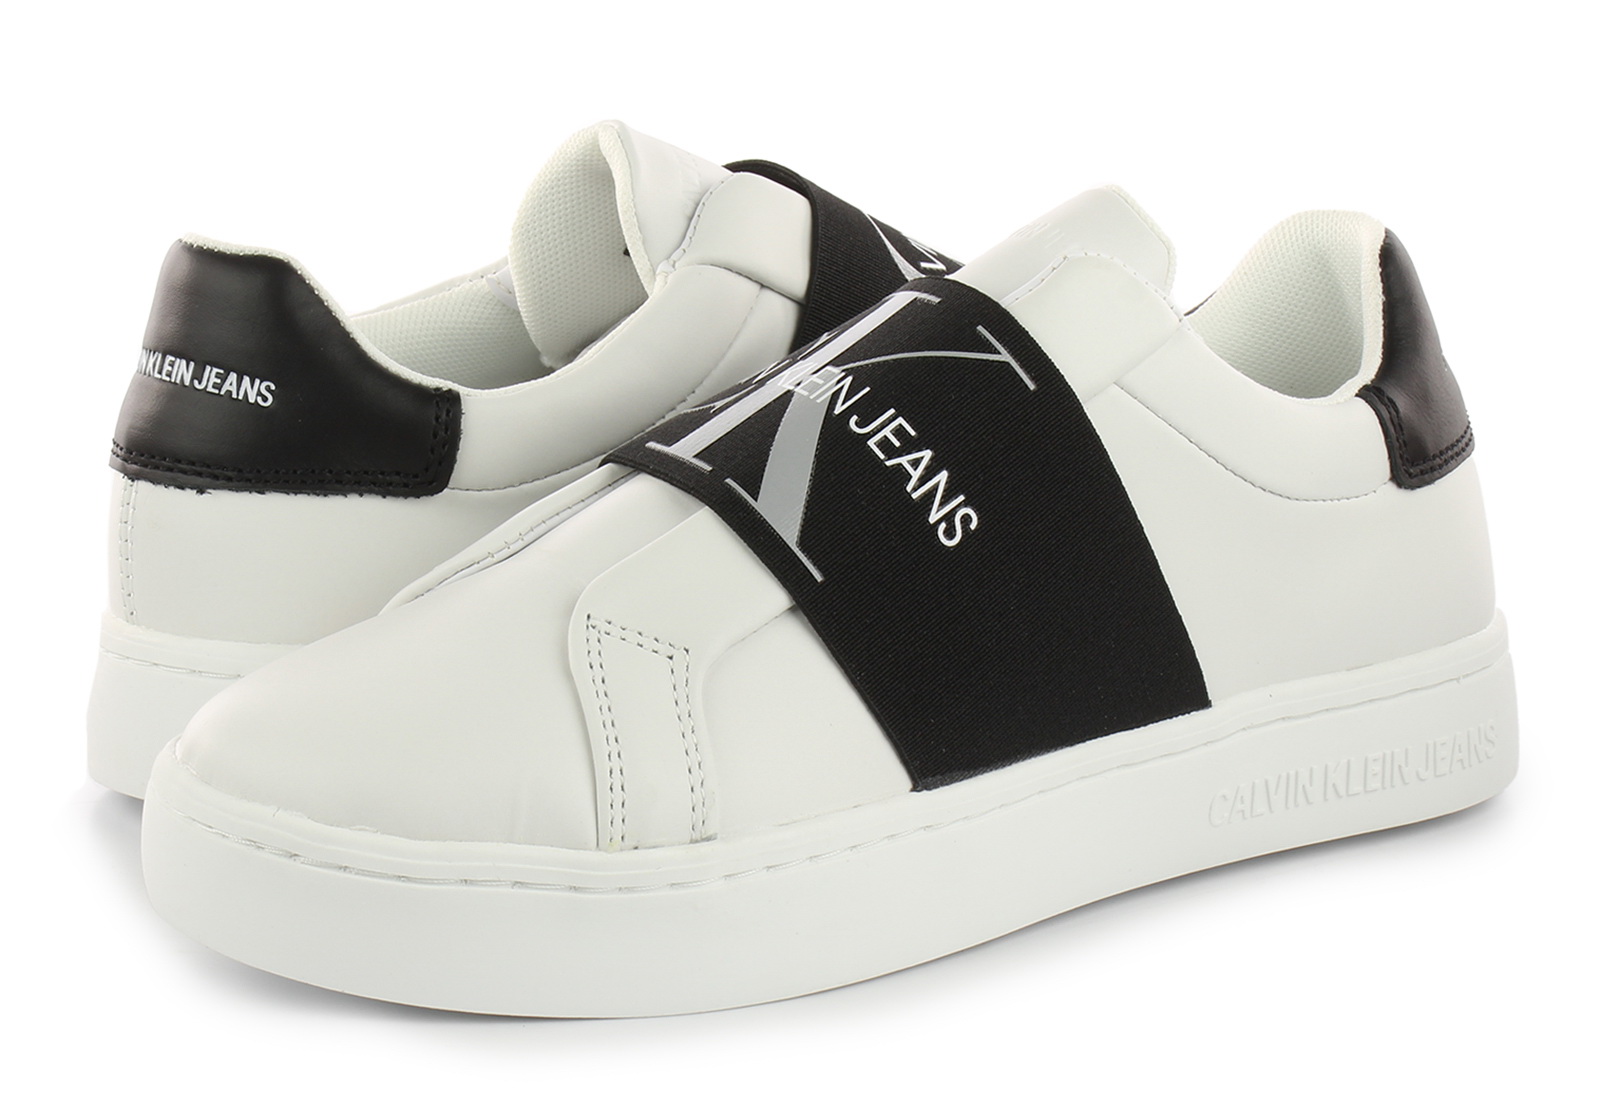 Calvin Klein Jeans Slip-ons - Solona 3a - YW00442-YAF - Online shop for  sneakers, shoes and boots